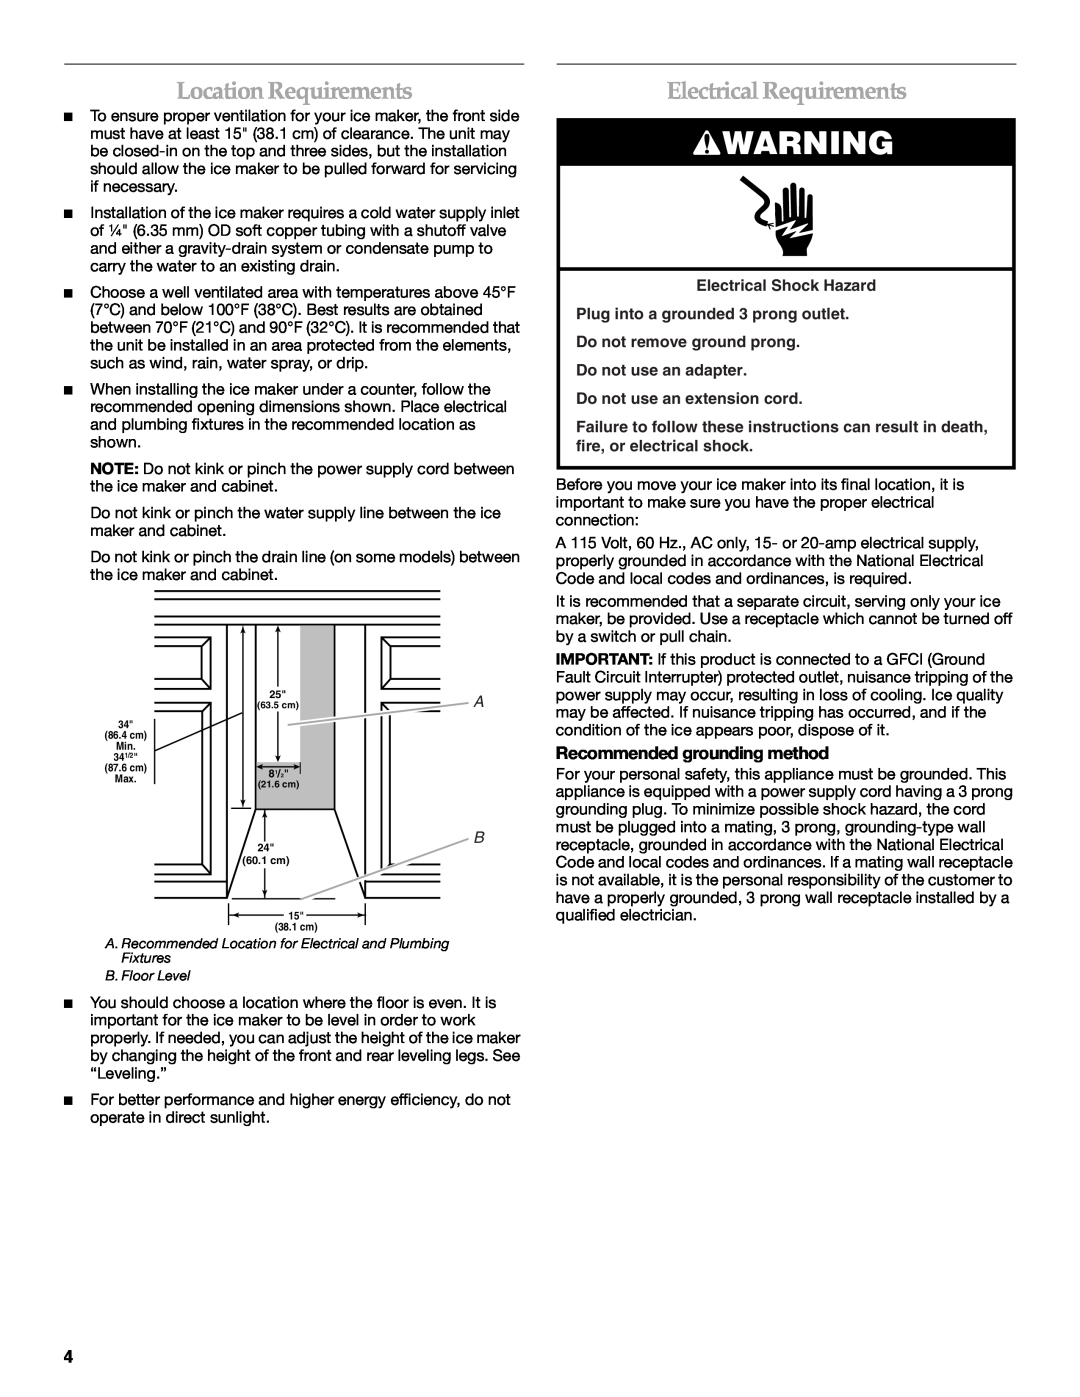 KitchenAid KUIO15NNLS manual Location Requirements, Electrical Requirements, Recommended grounding method 